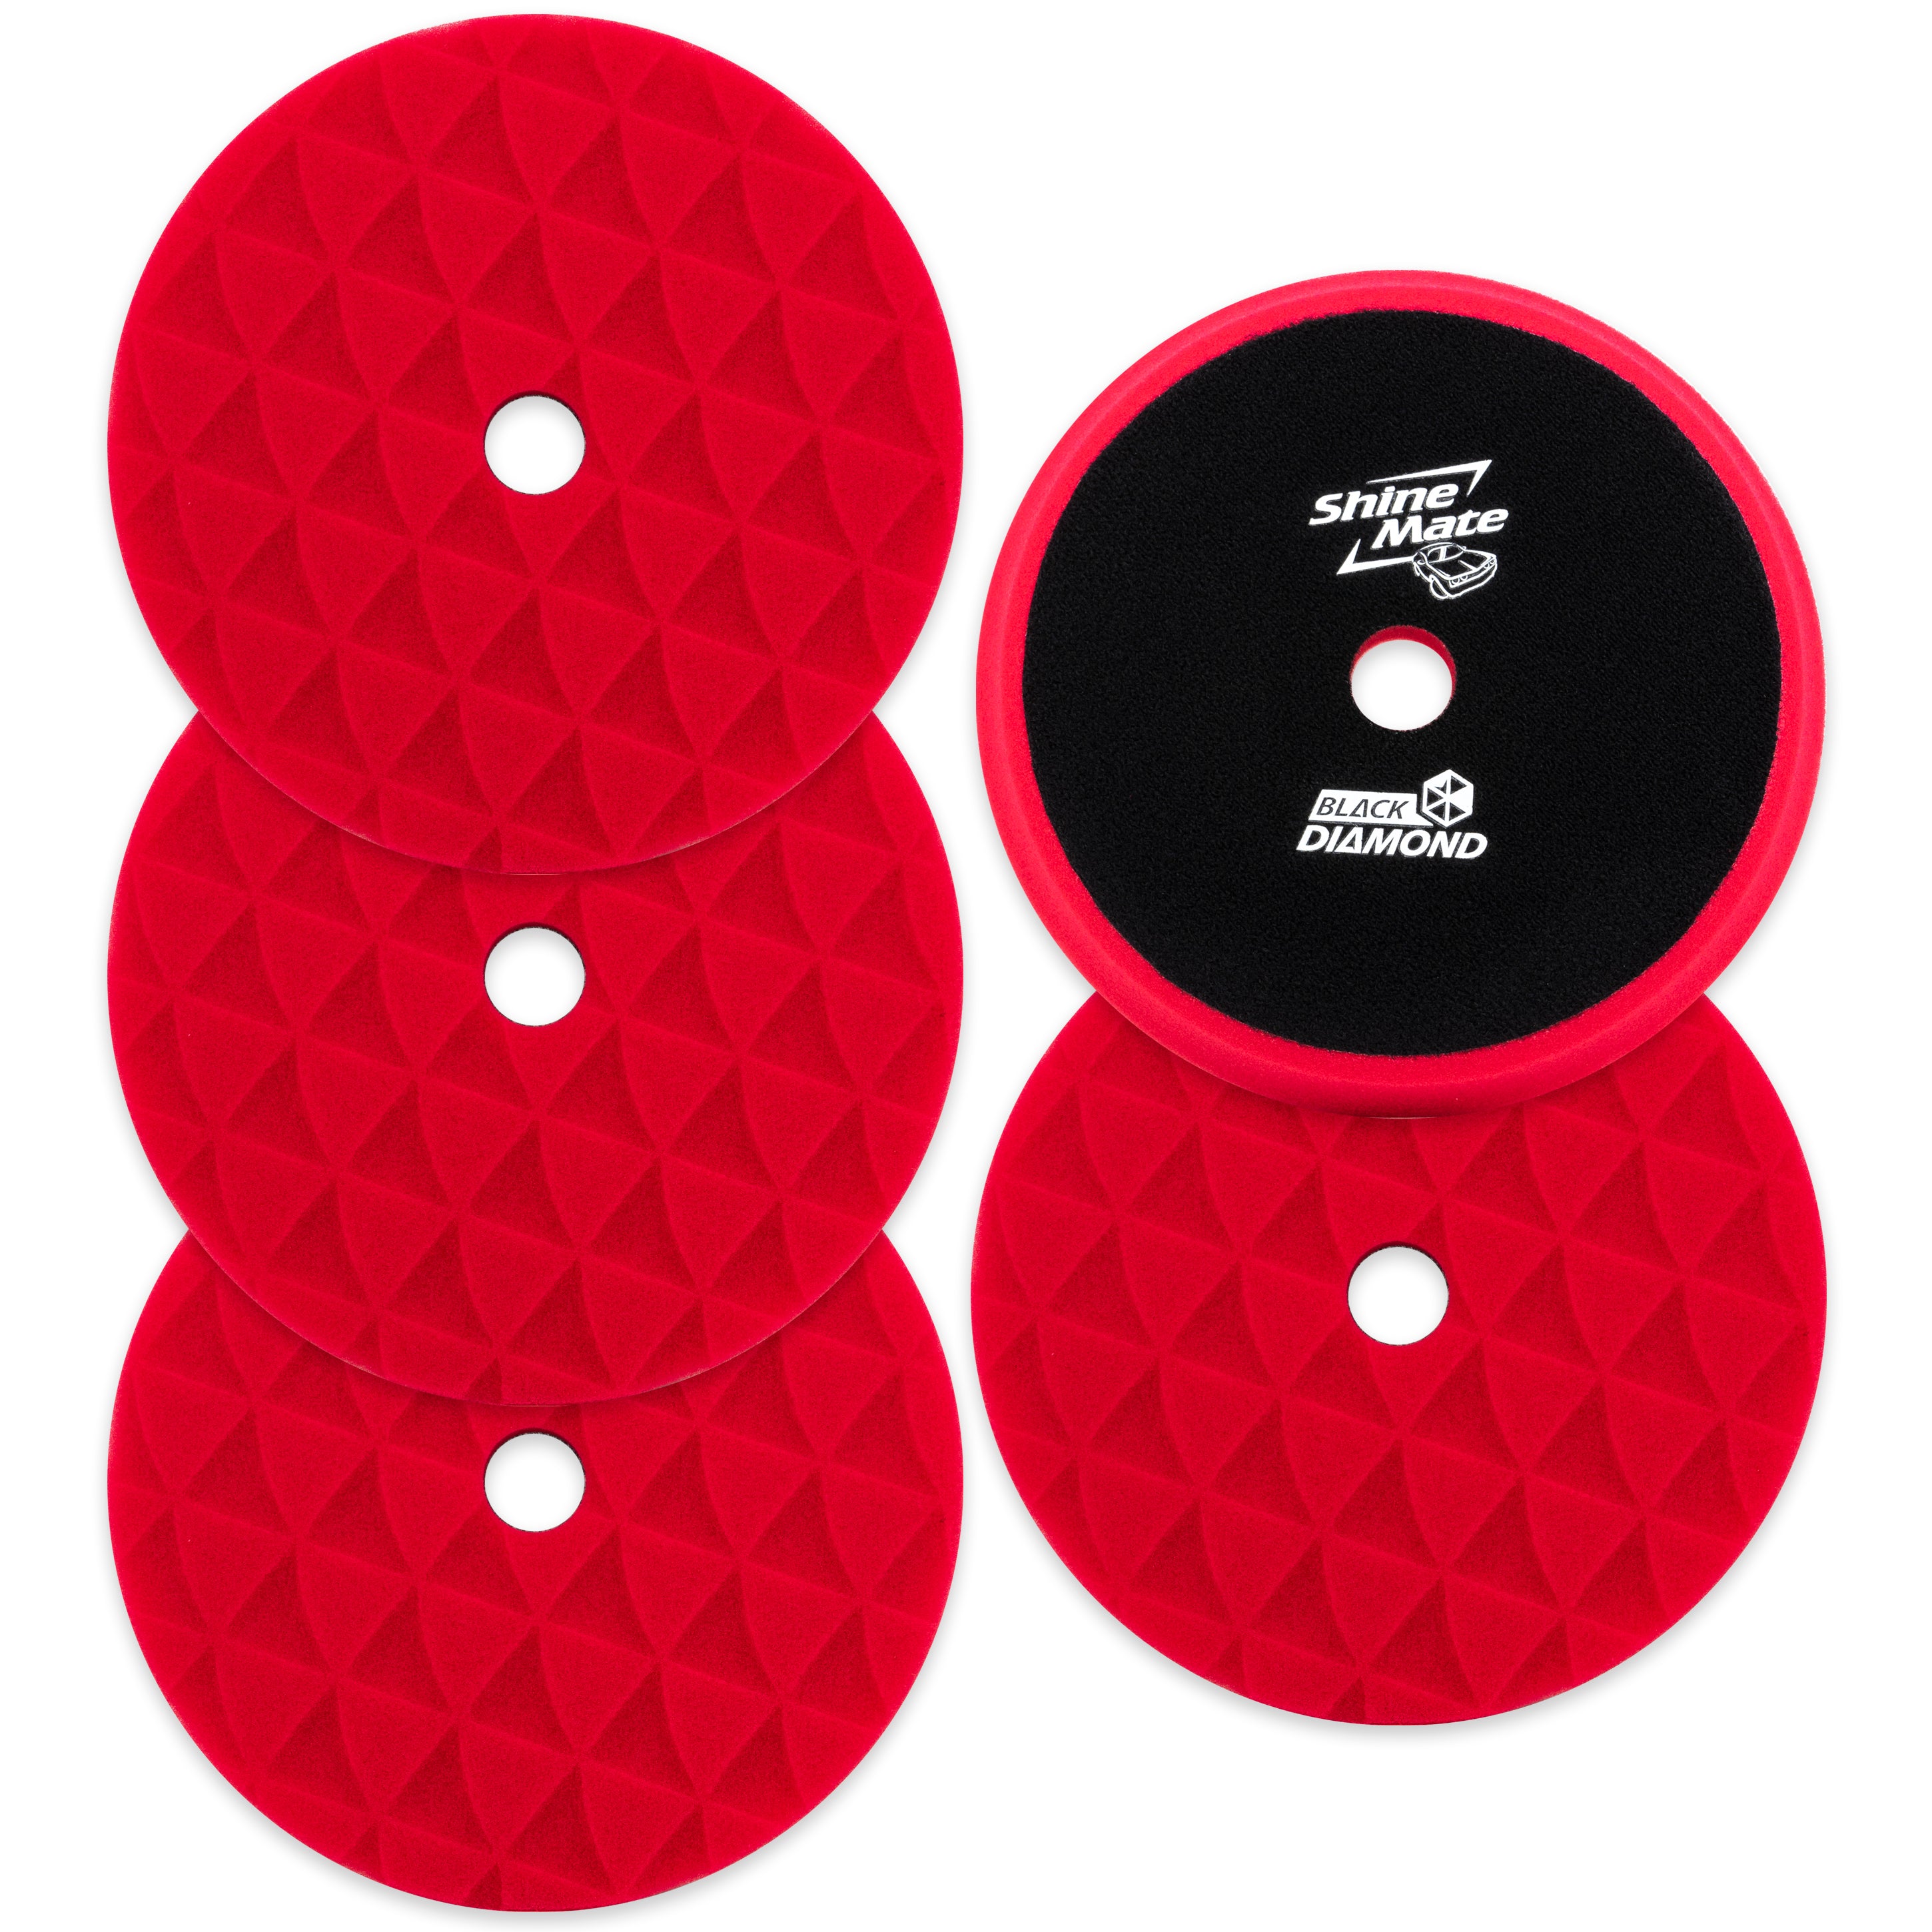 Shinemate - 7" Black Diamond Red Finishing Foam Pad to fit 6" Backing Plates (5 Pack)